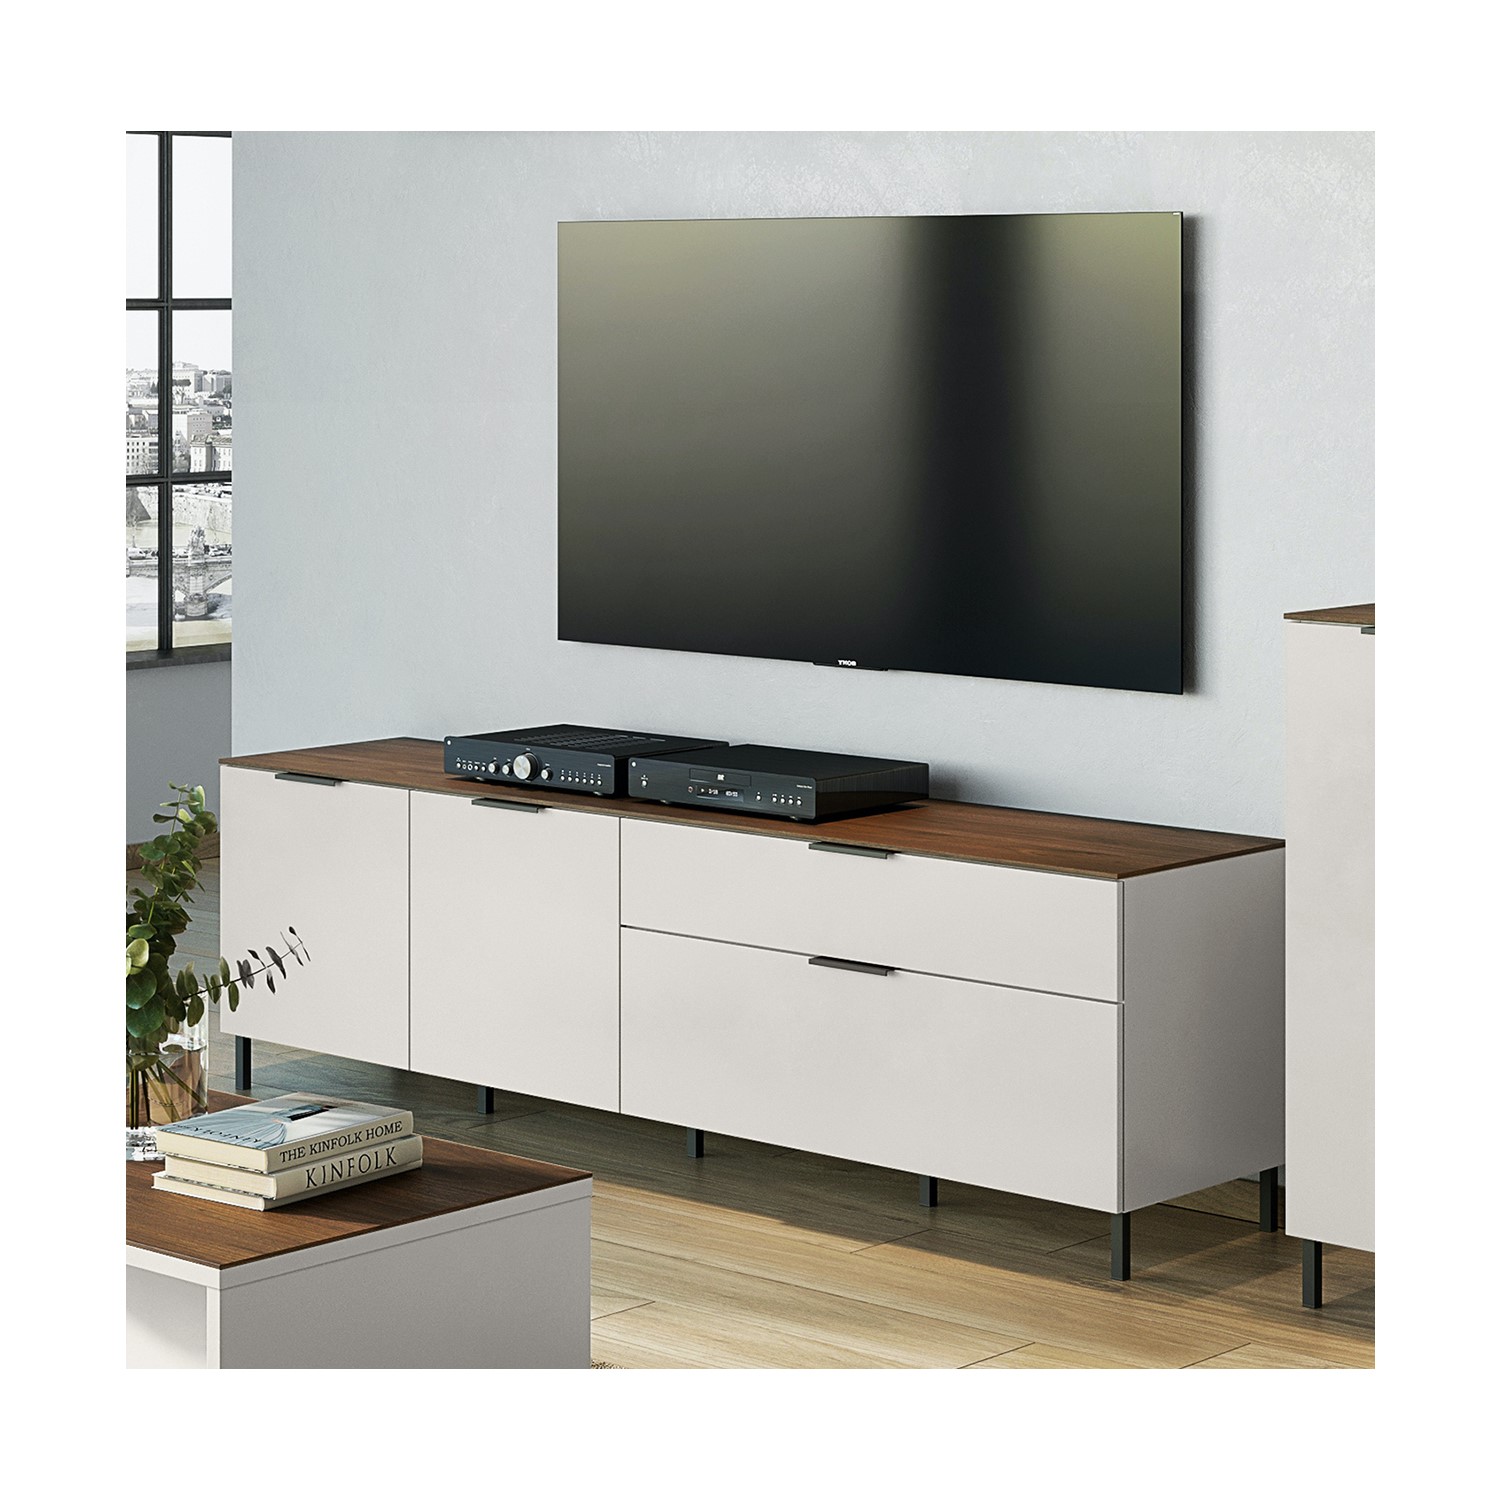 Cream TV Unit with Storage Cupboards - TV's up to 70 - California